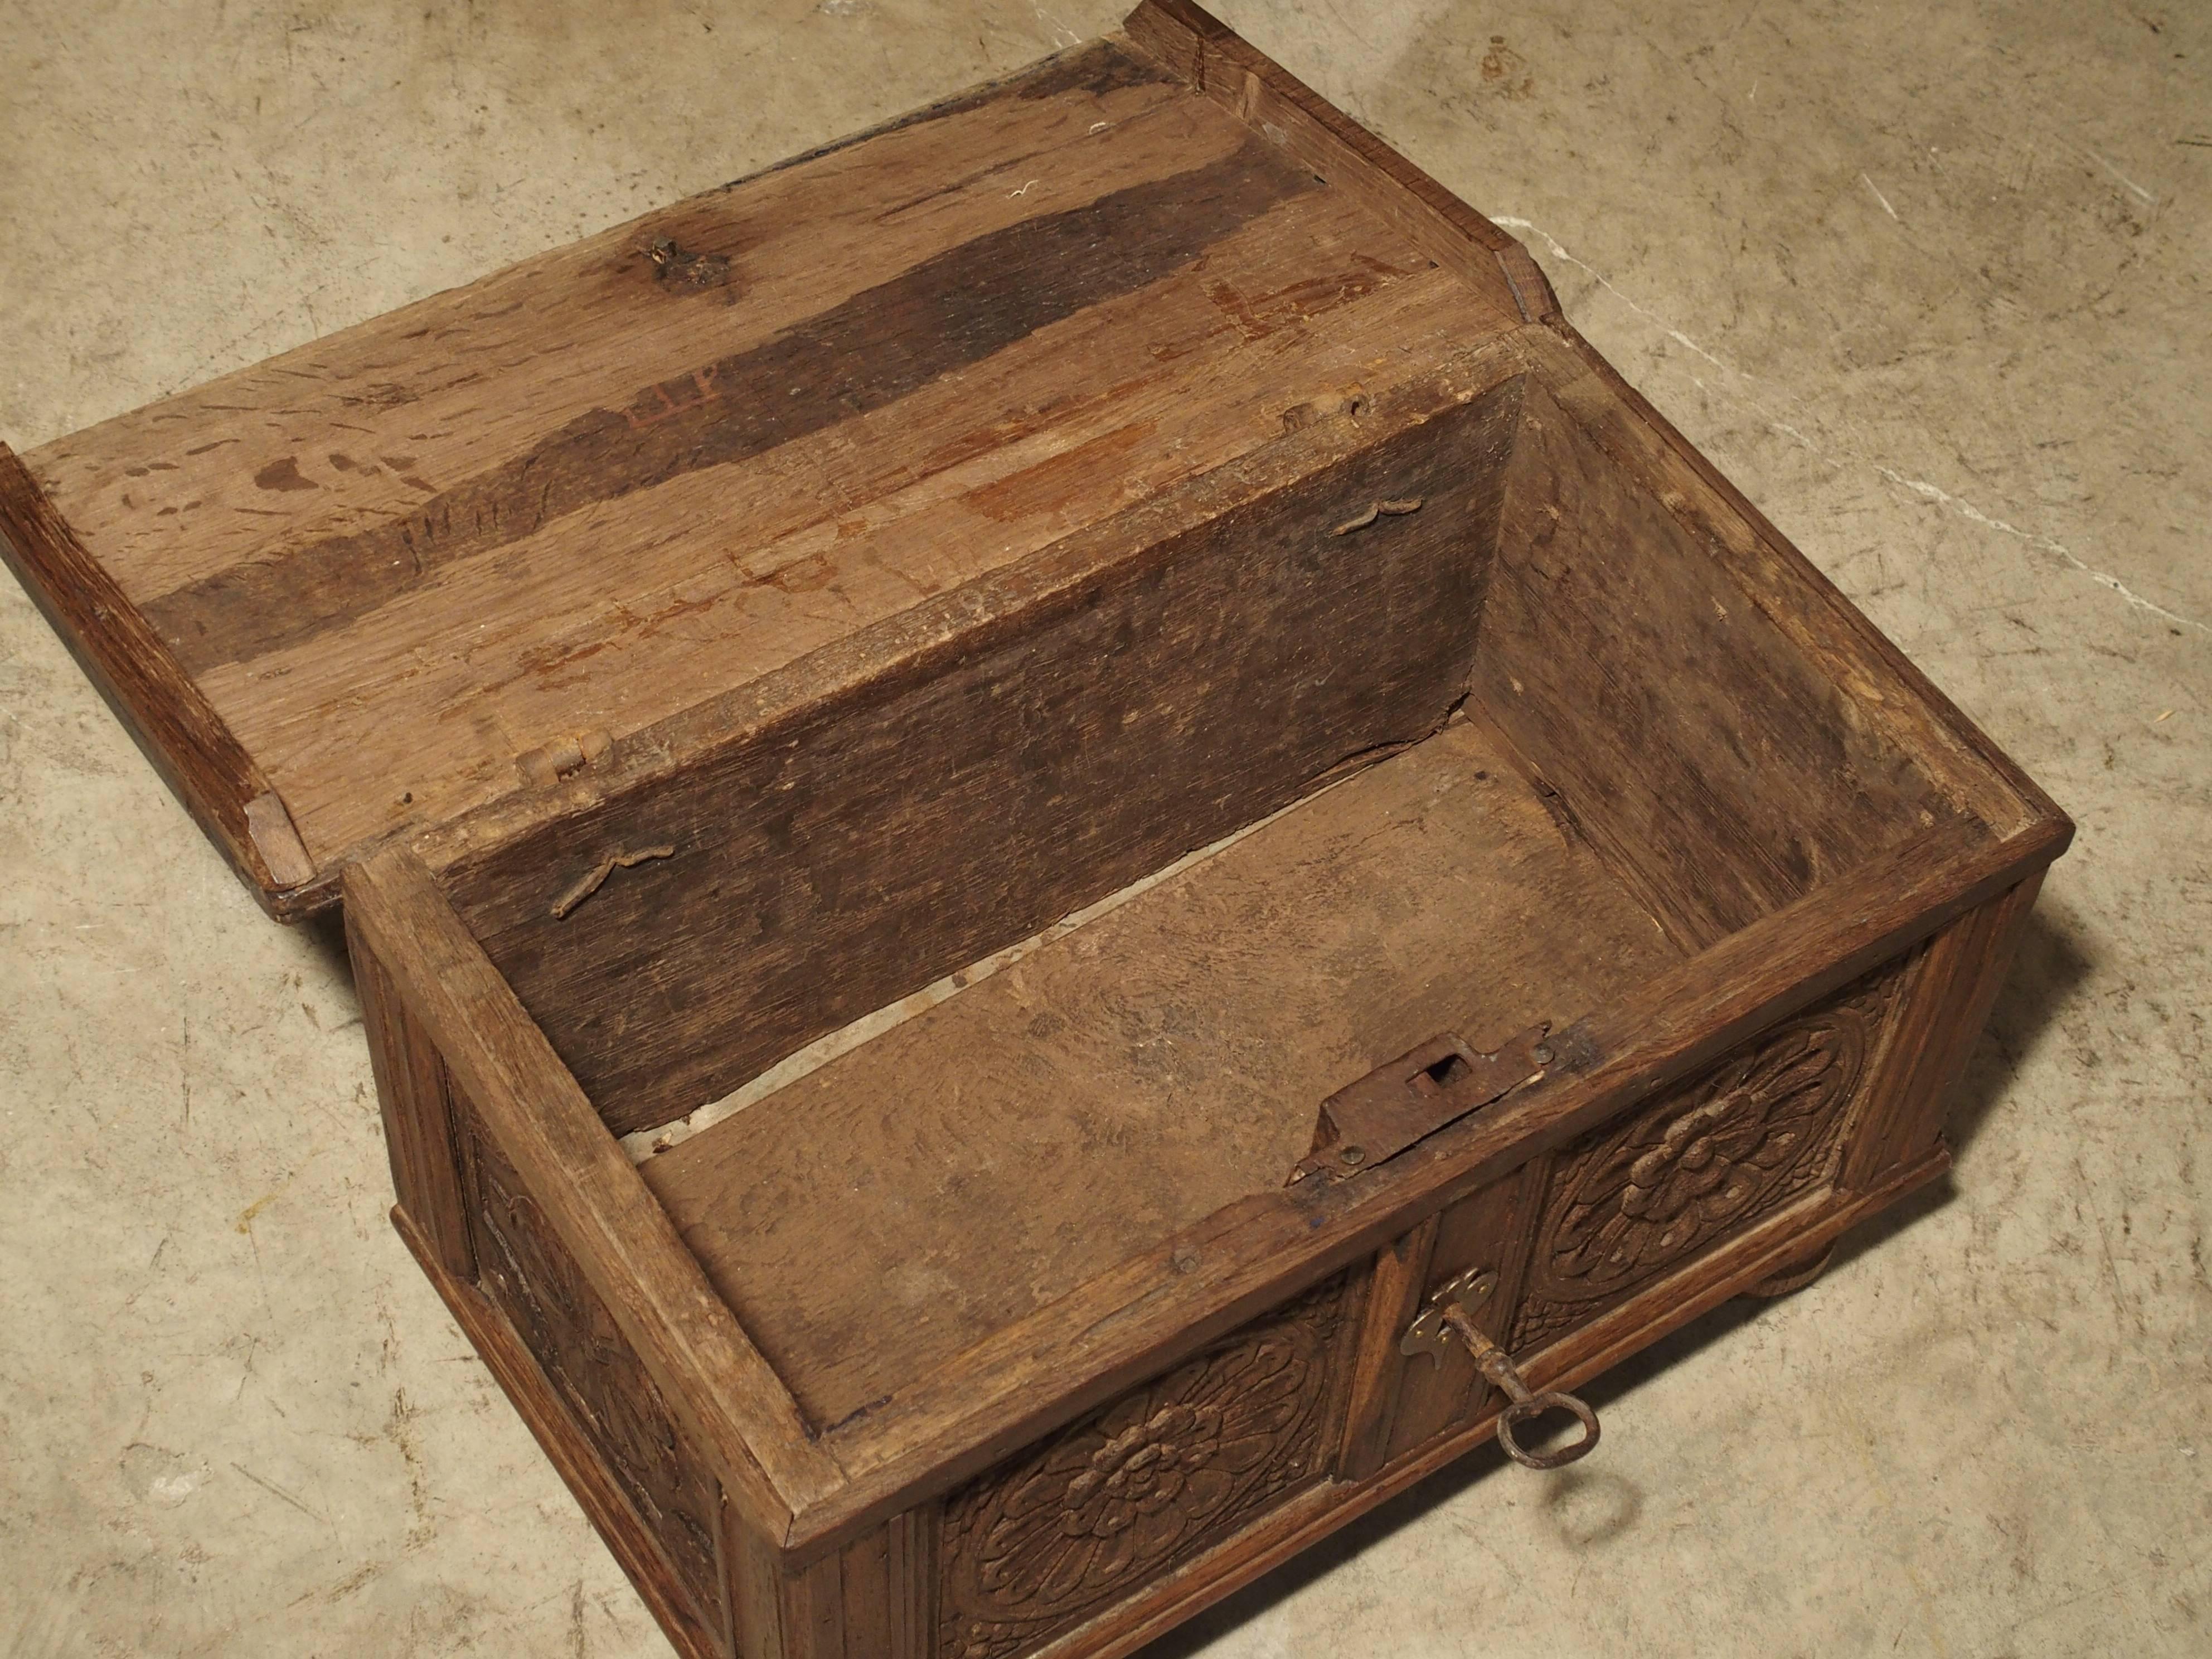 This antique oak table trunk is from Spain and dates to the 1600s. The top is attached to the back panel with two wrought iron hinges with decorative straps that cover most of the top. It is interesting to note that there are slightly different